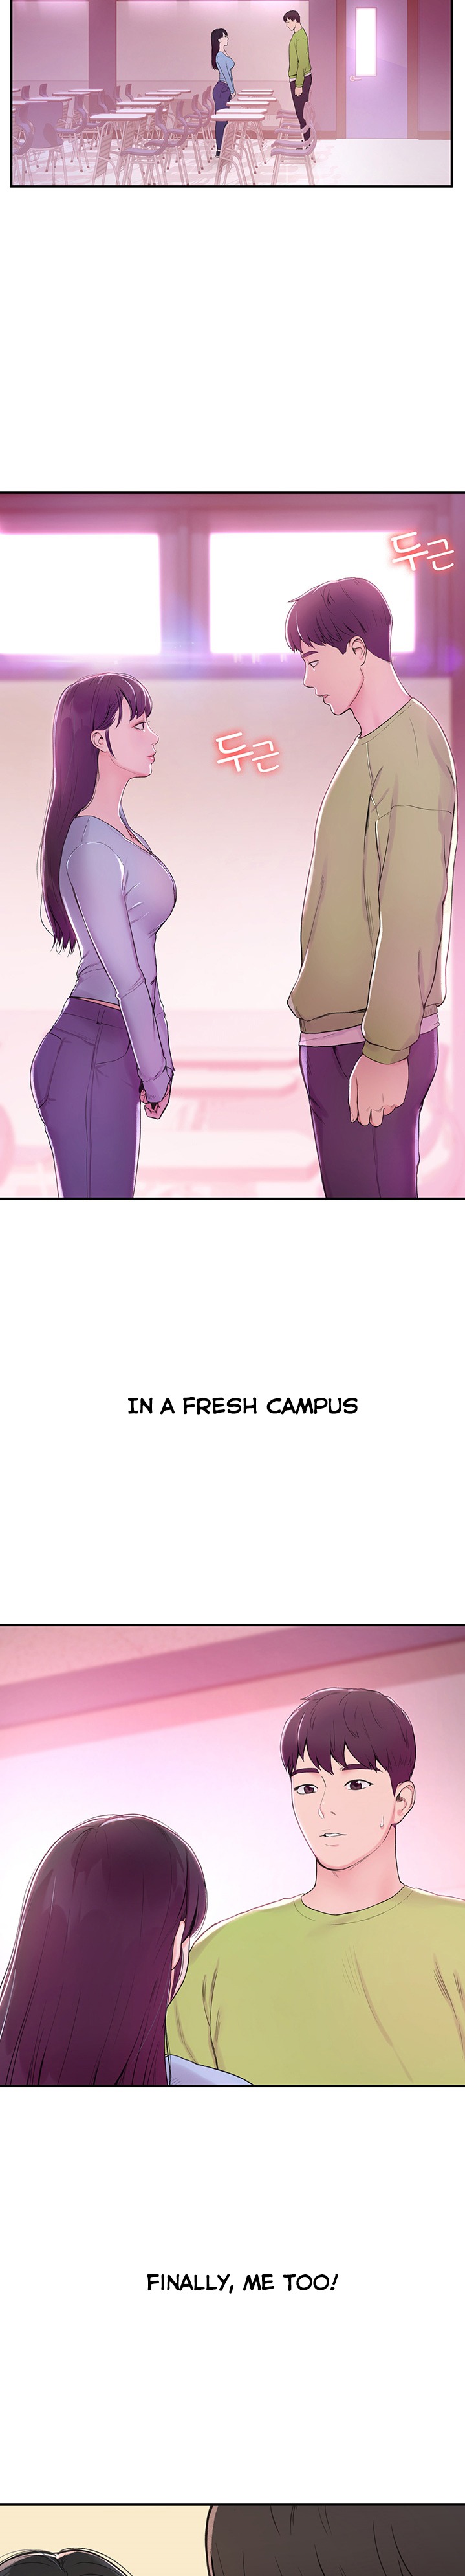 Campus Today Chapter 1 - Page 1